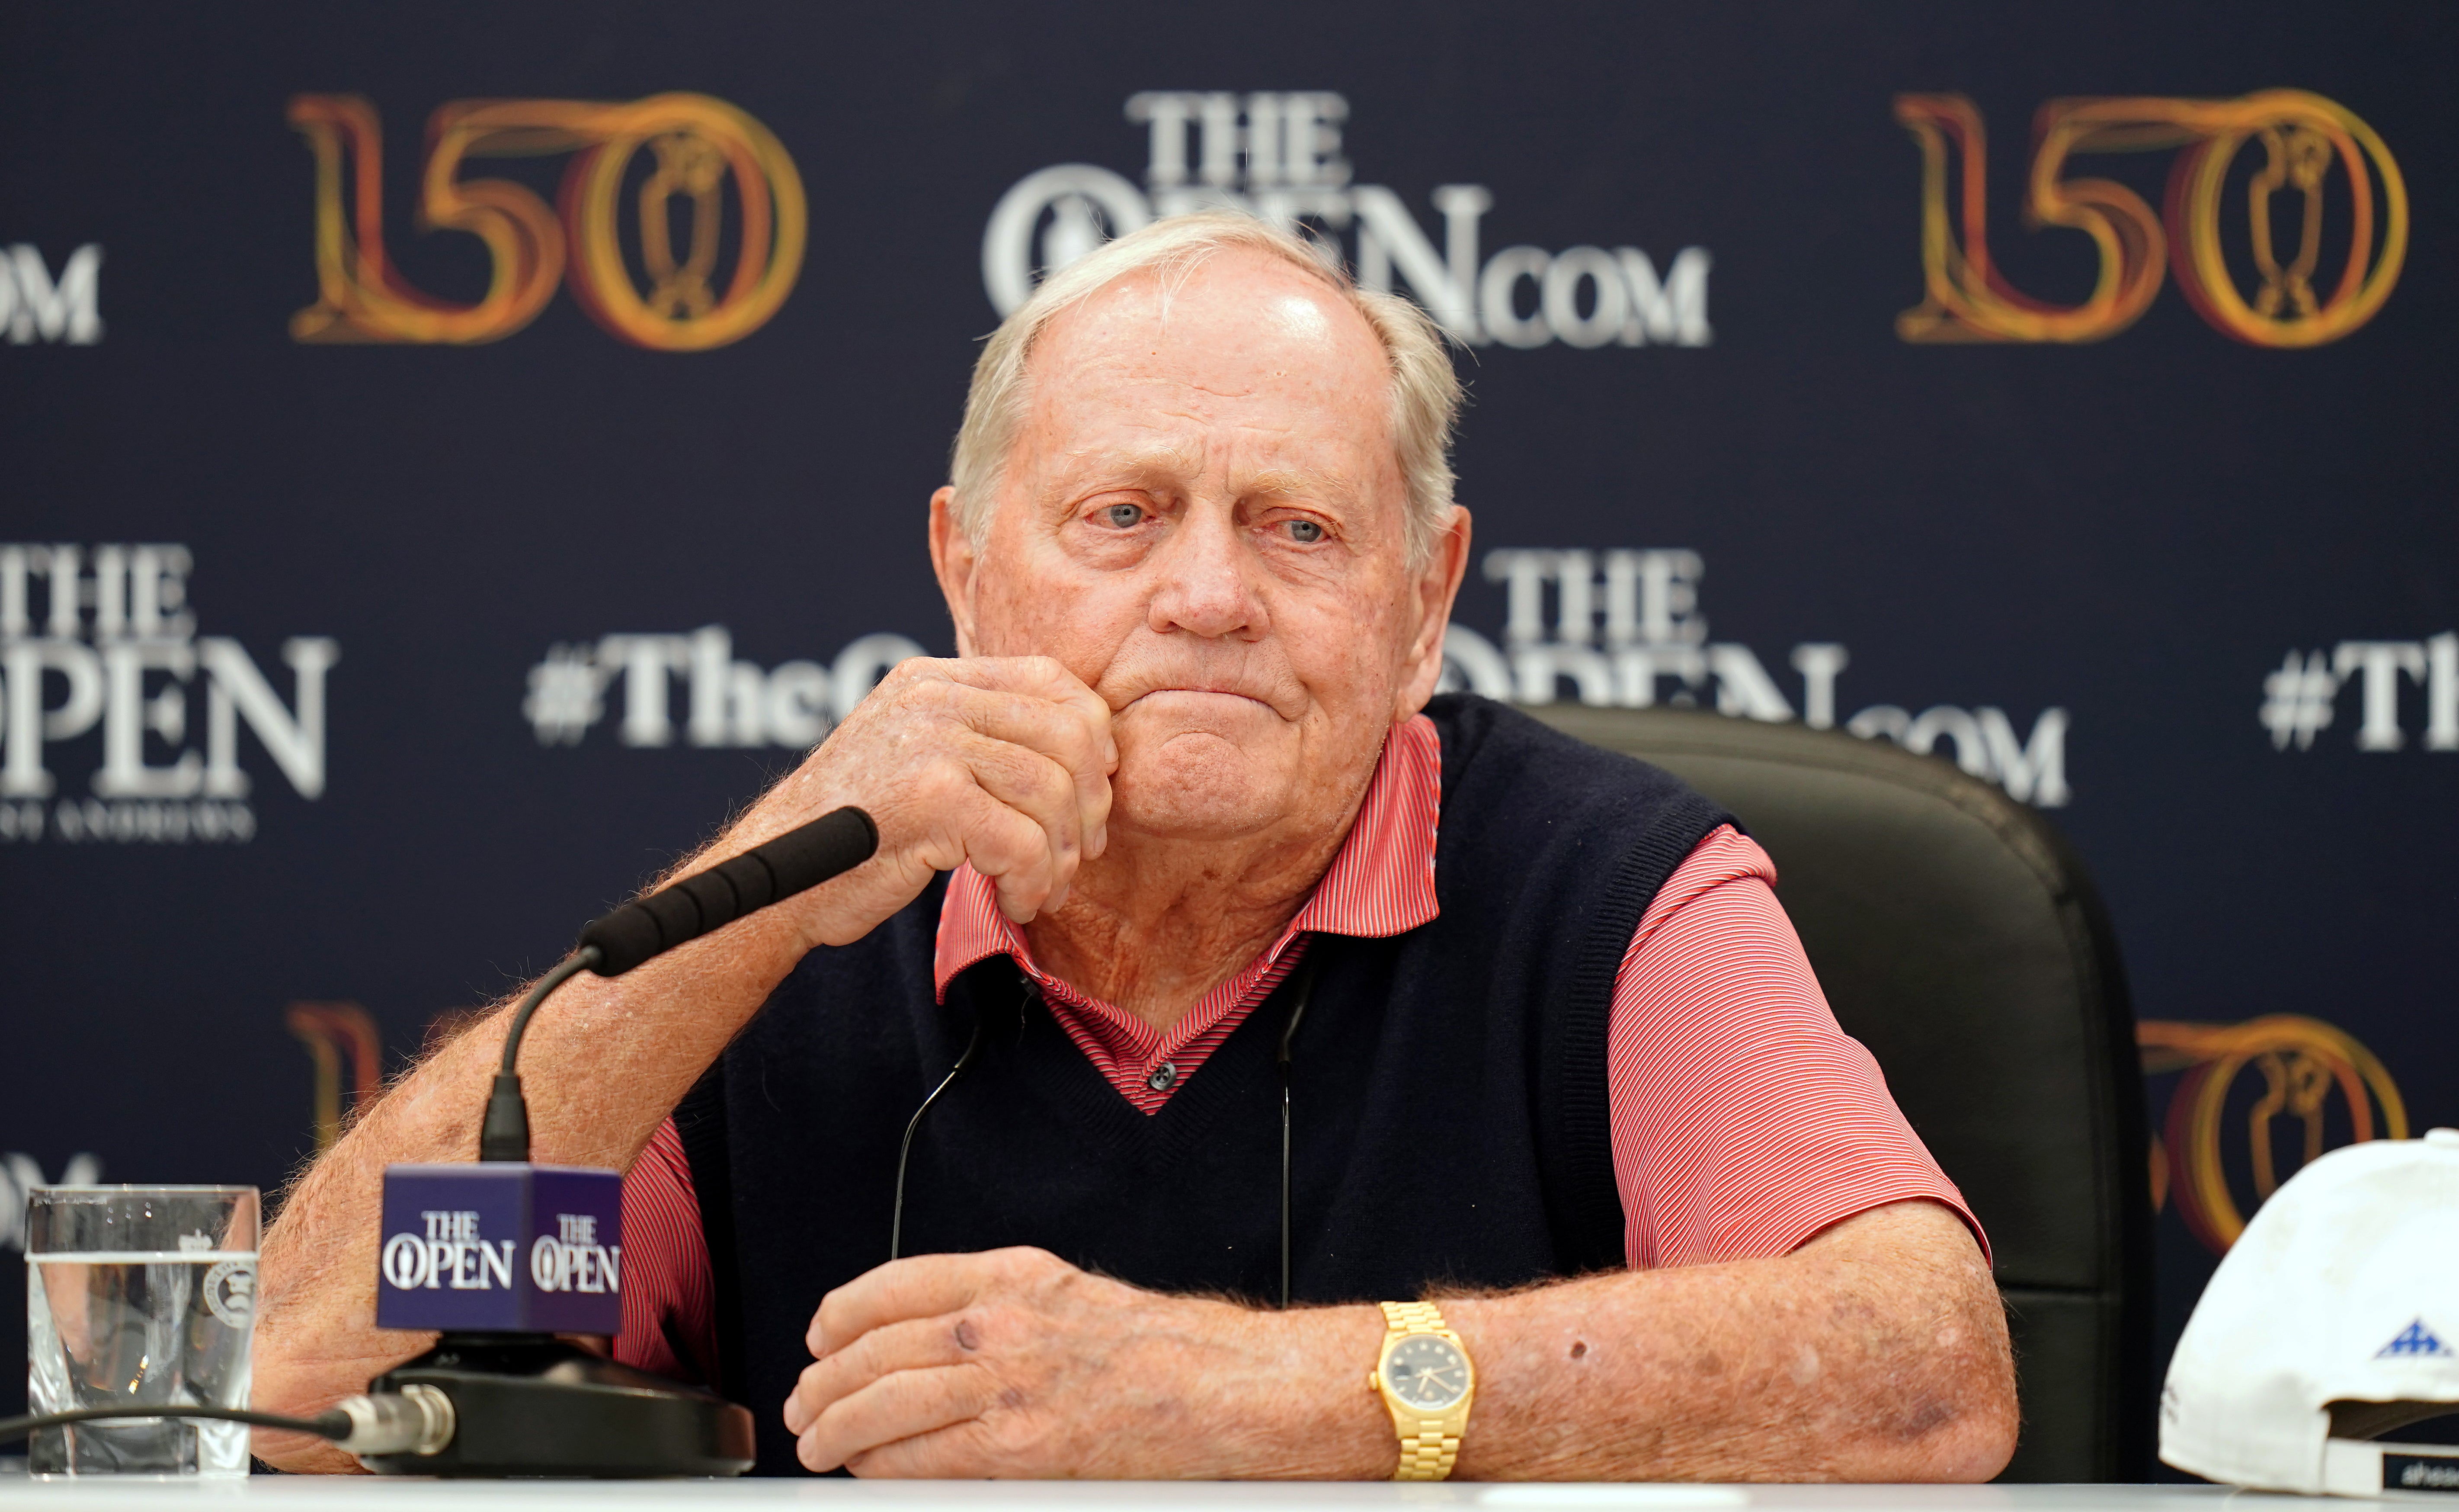 Jack Nicklaus said he remained friends with Greg Norman despite their disagreement over LIV Golf (Jane Barlow/PA)